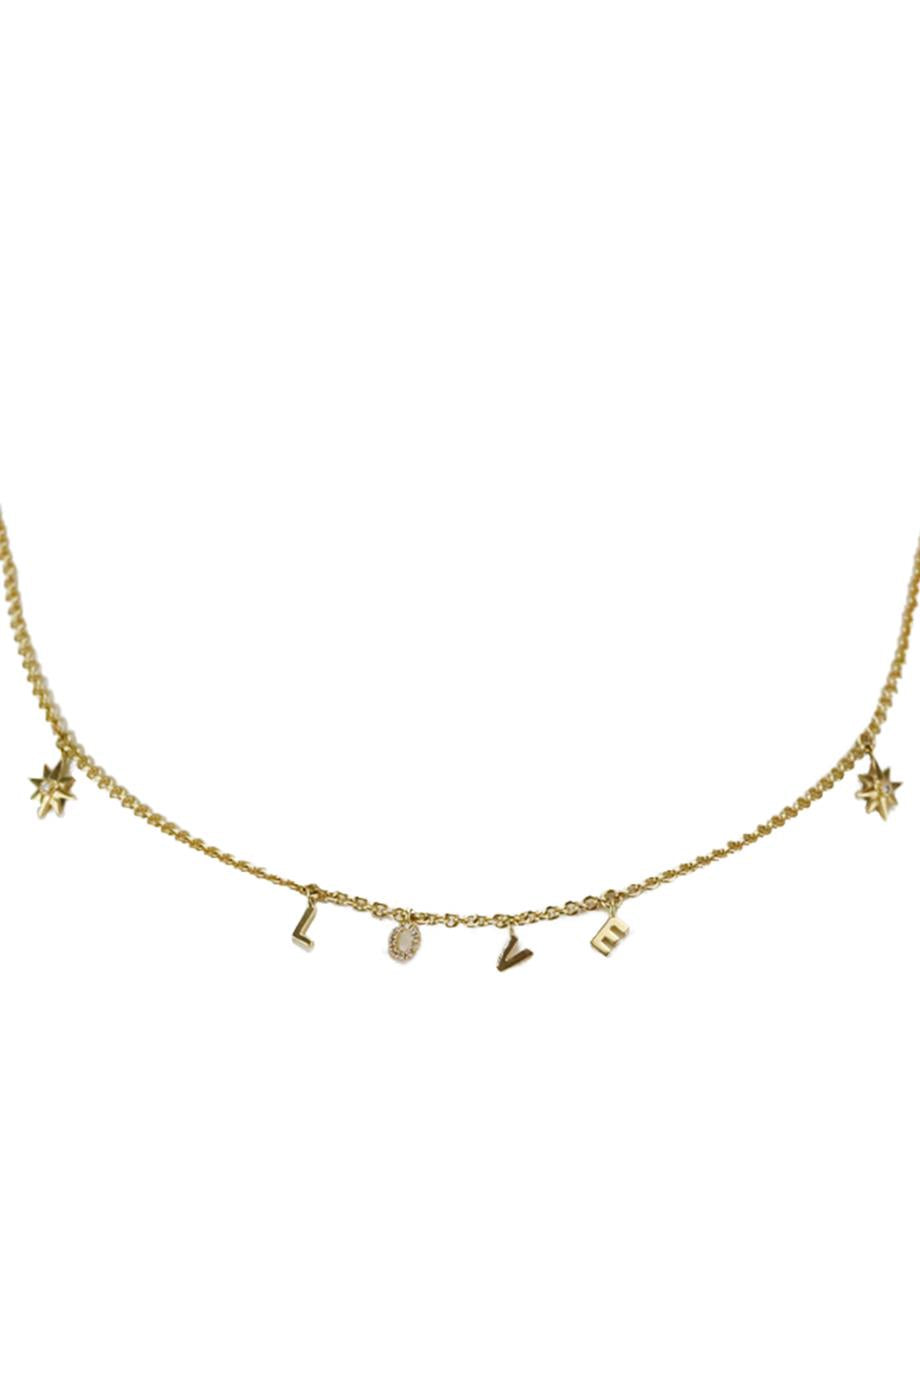 SHAY LOVE 18K YELLOW GOLD AND DIAMOND CHAIN NECKLACE